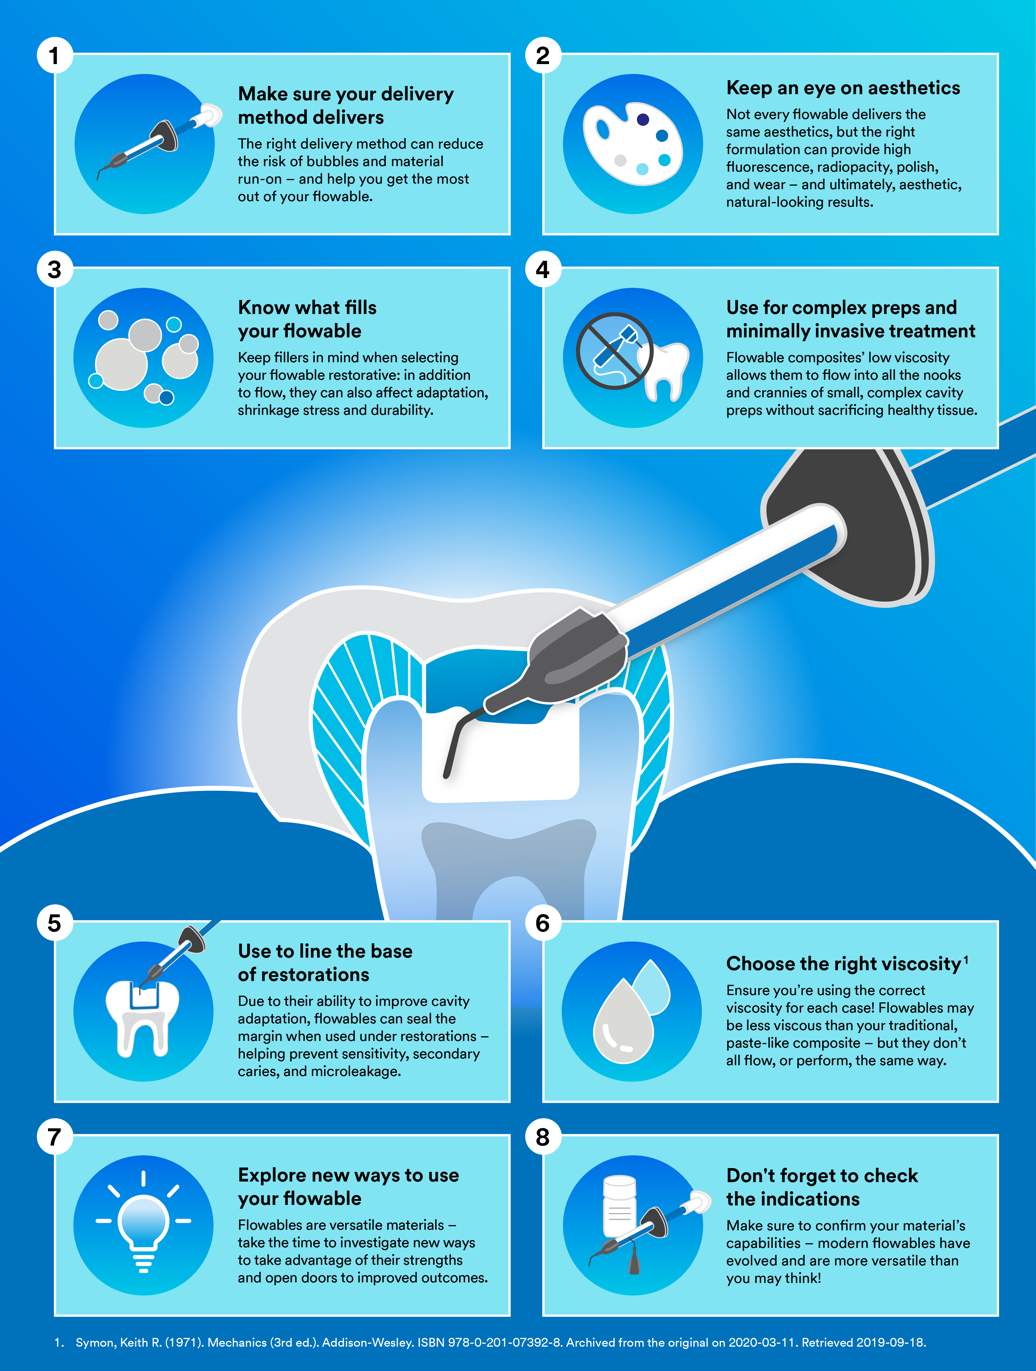 Infographic summary of the article featuring iconographic illustrations of each benefit.